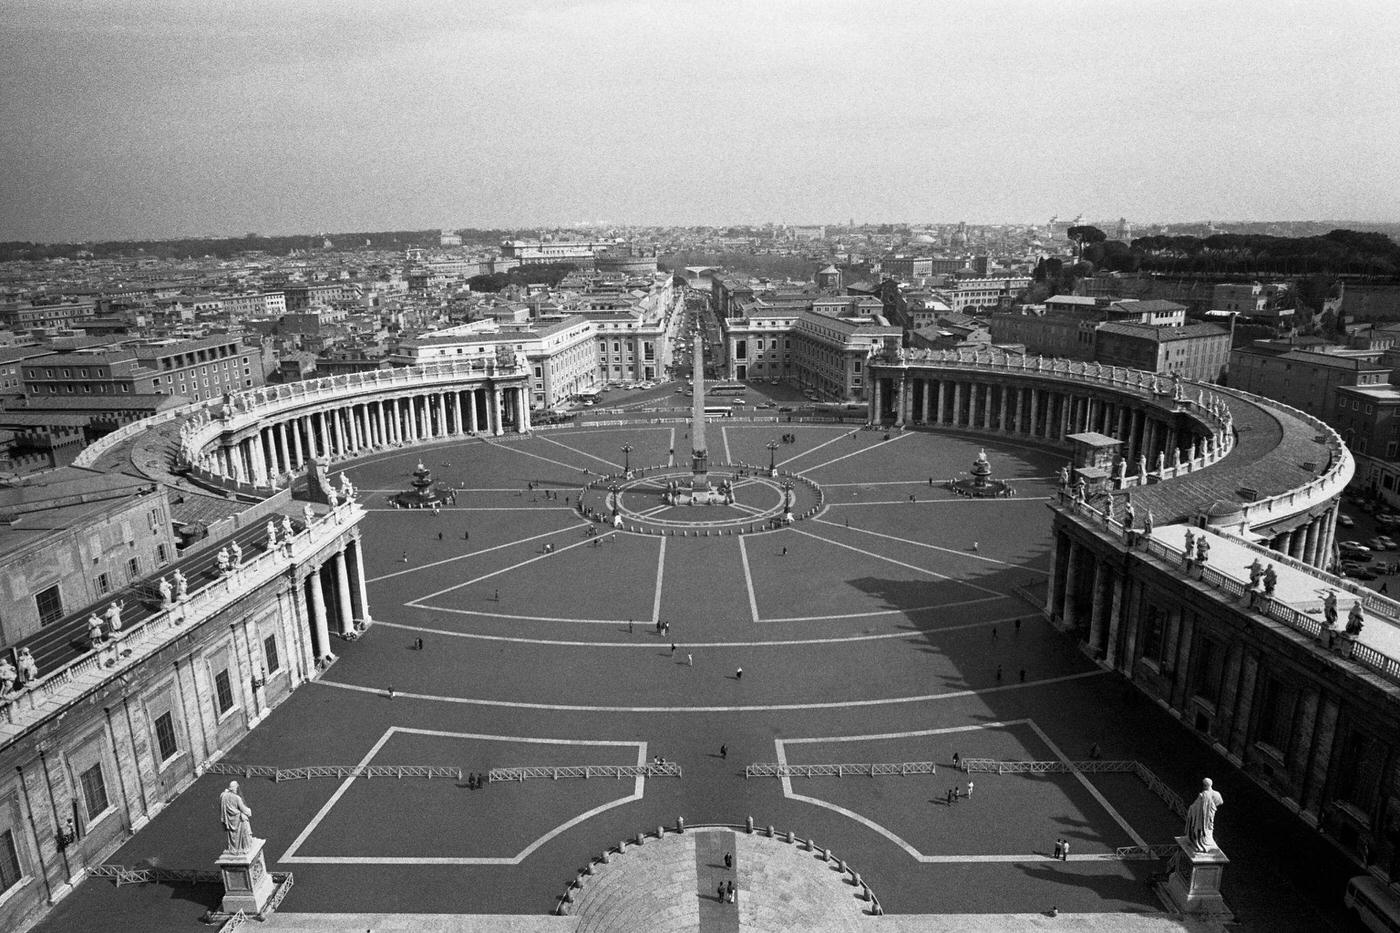 Aerial View of St Peter's Square from the Dome, Vatican City, 1985